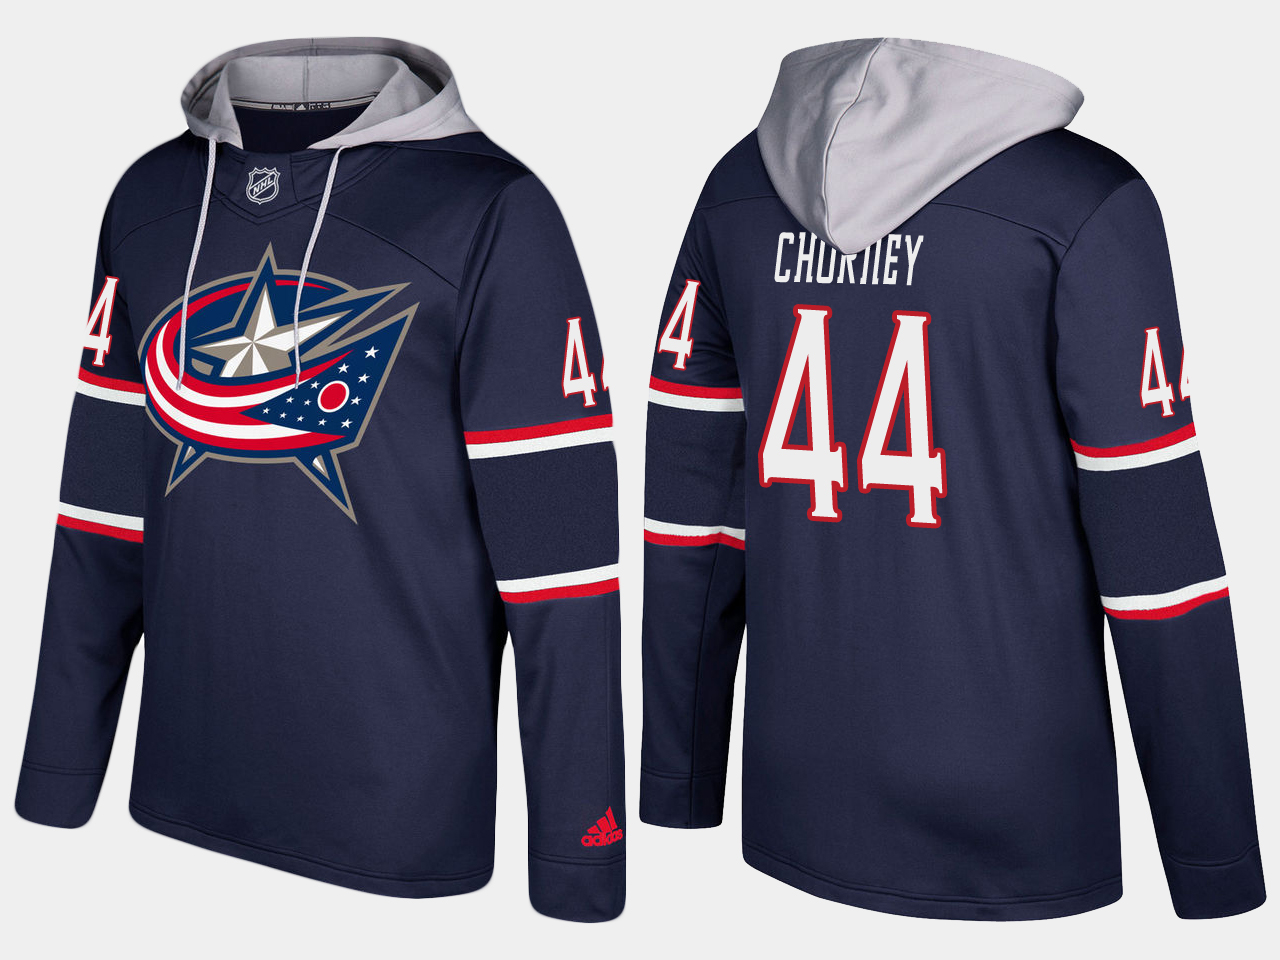 Nike Blue Jackets 44 Taylor Chorney Name And Number Navy Hoodie